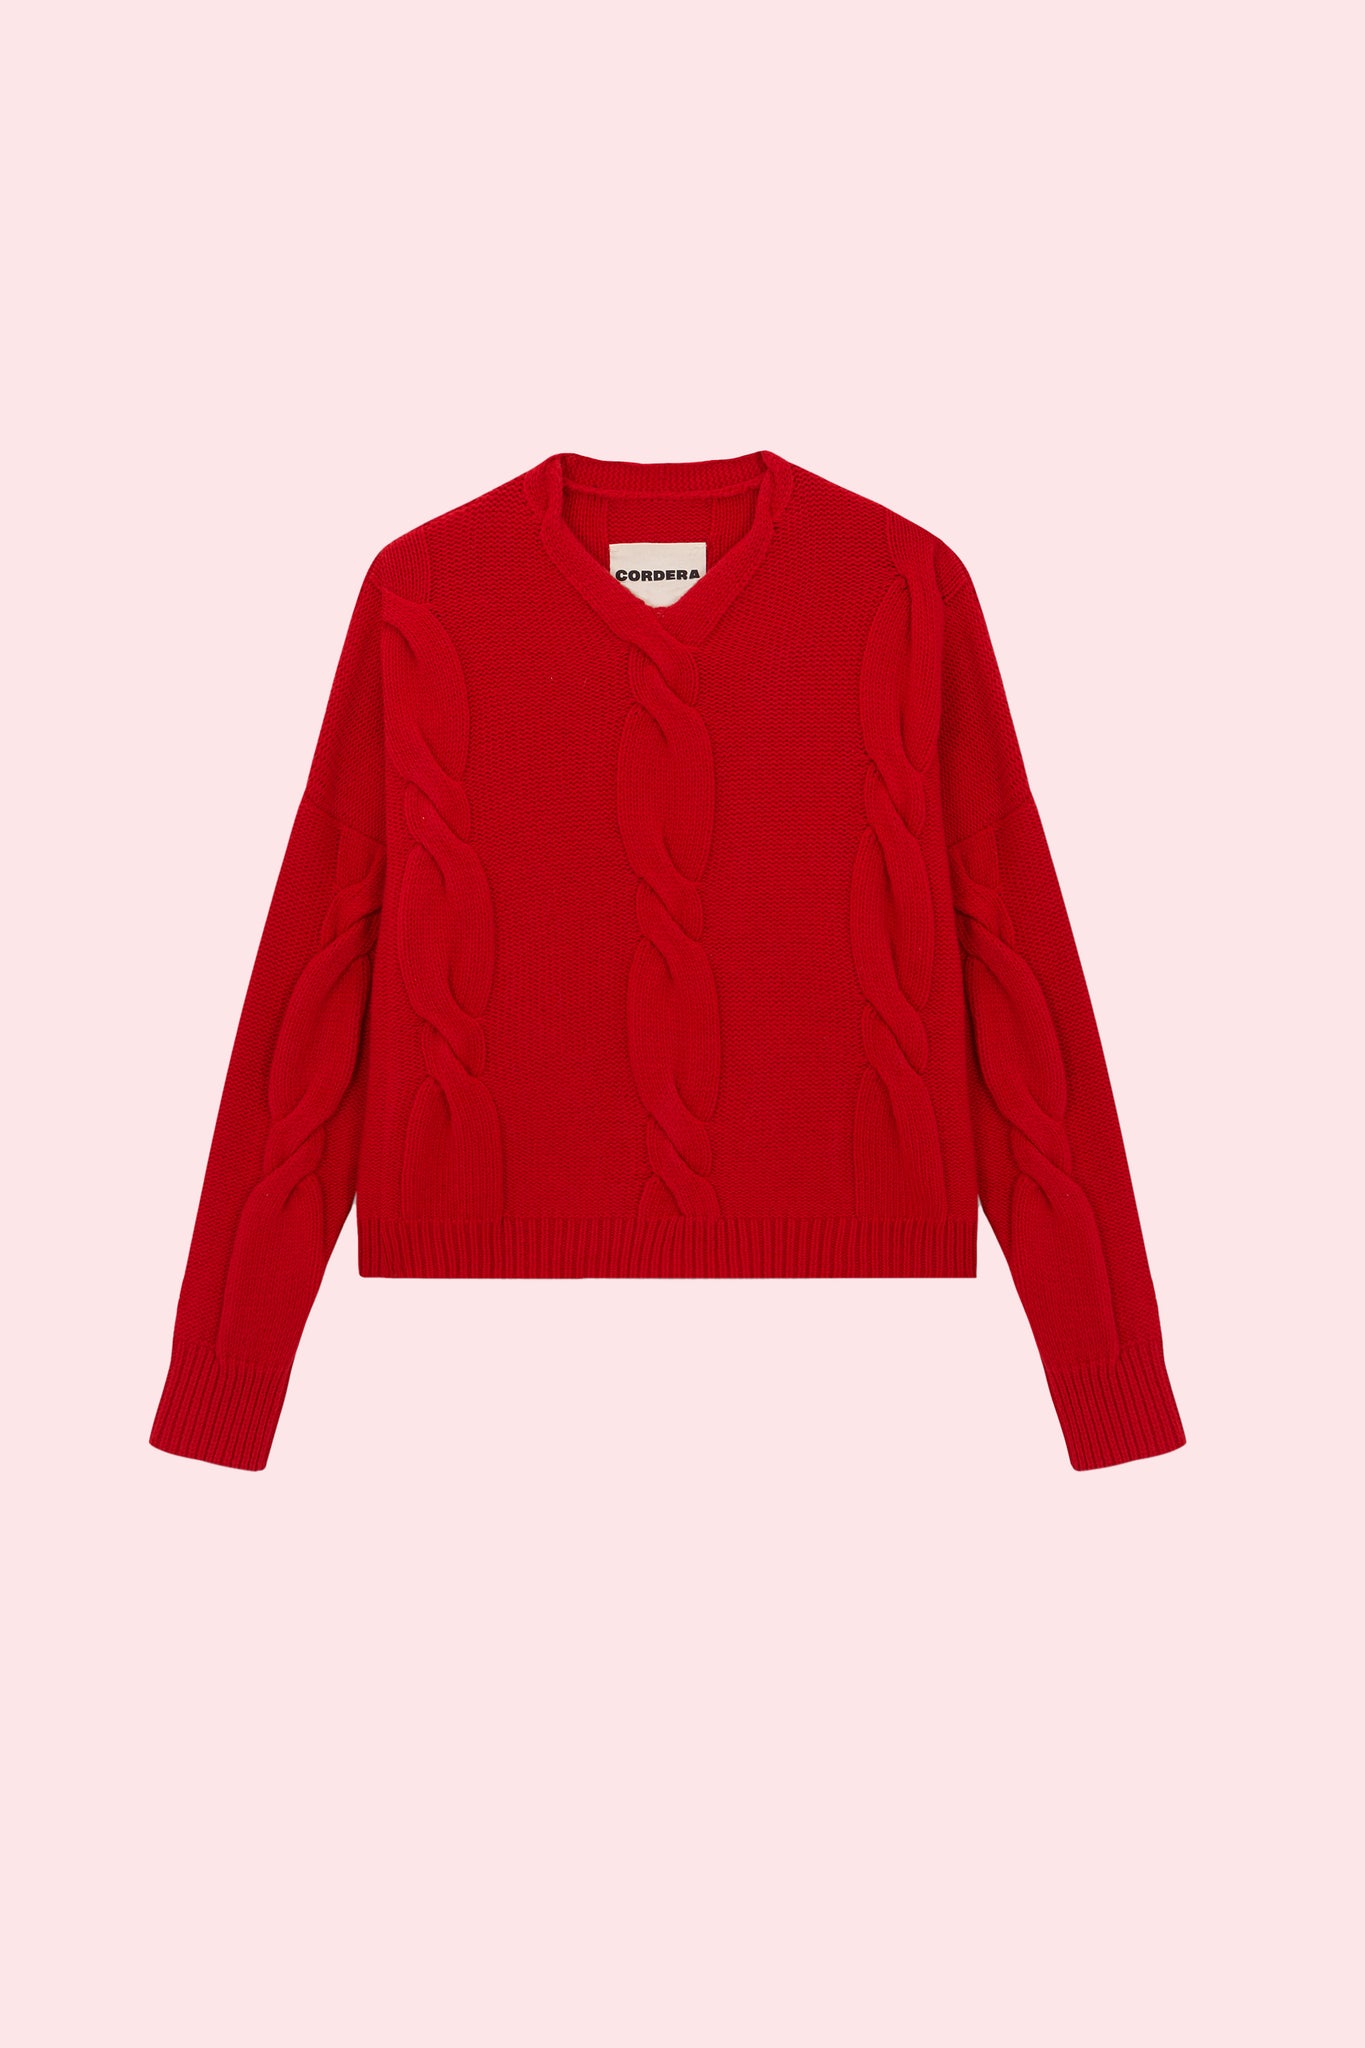 Cordera wool & cashmere braided sweater red product front